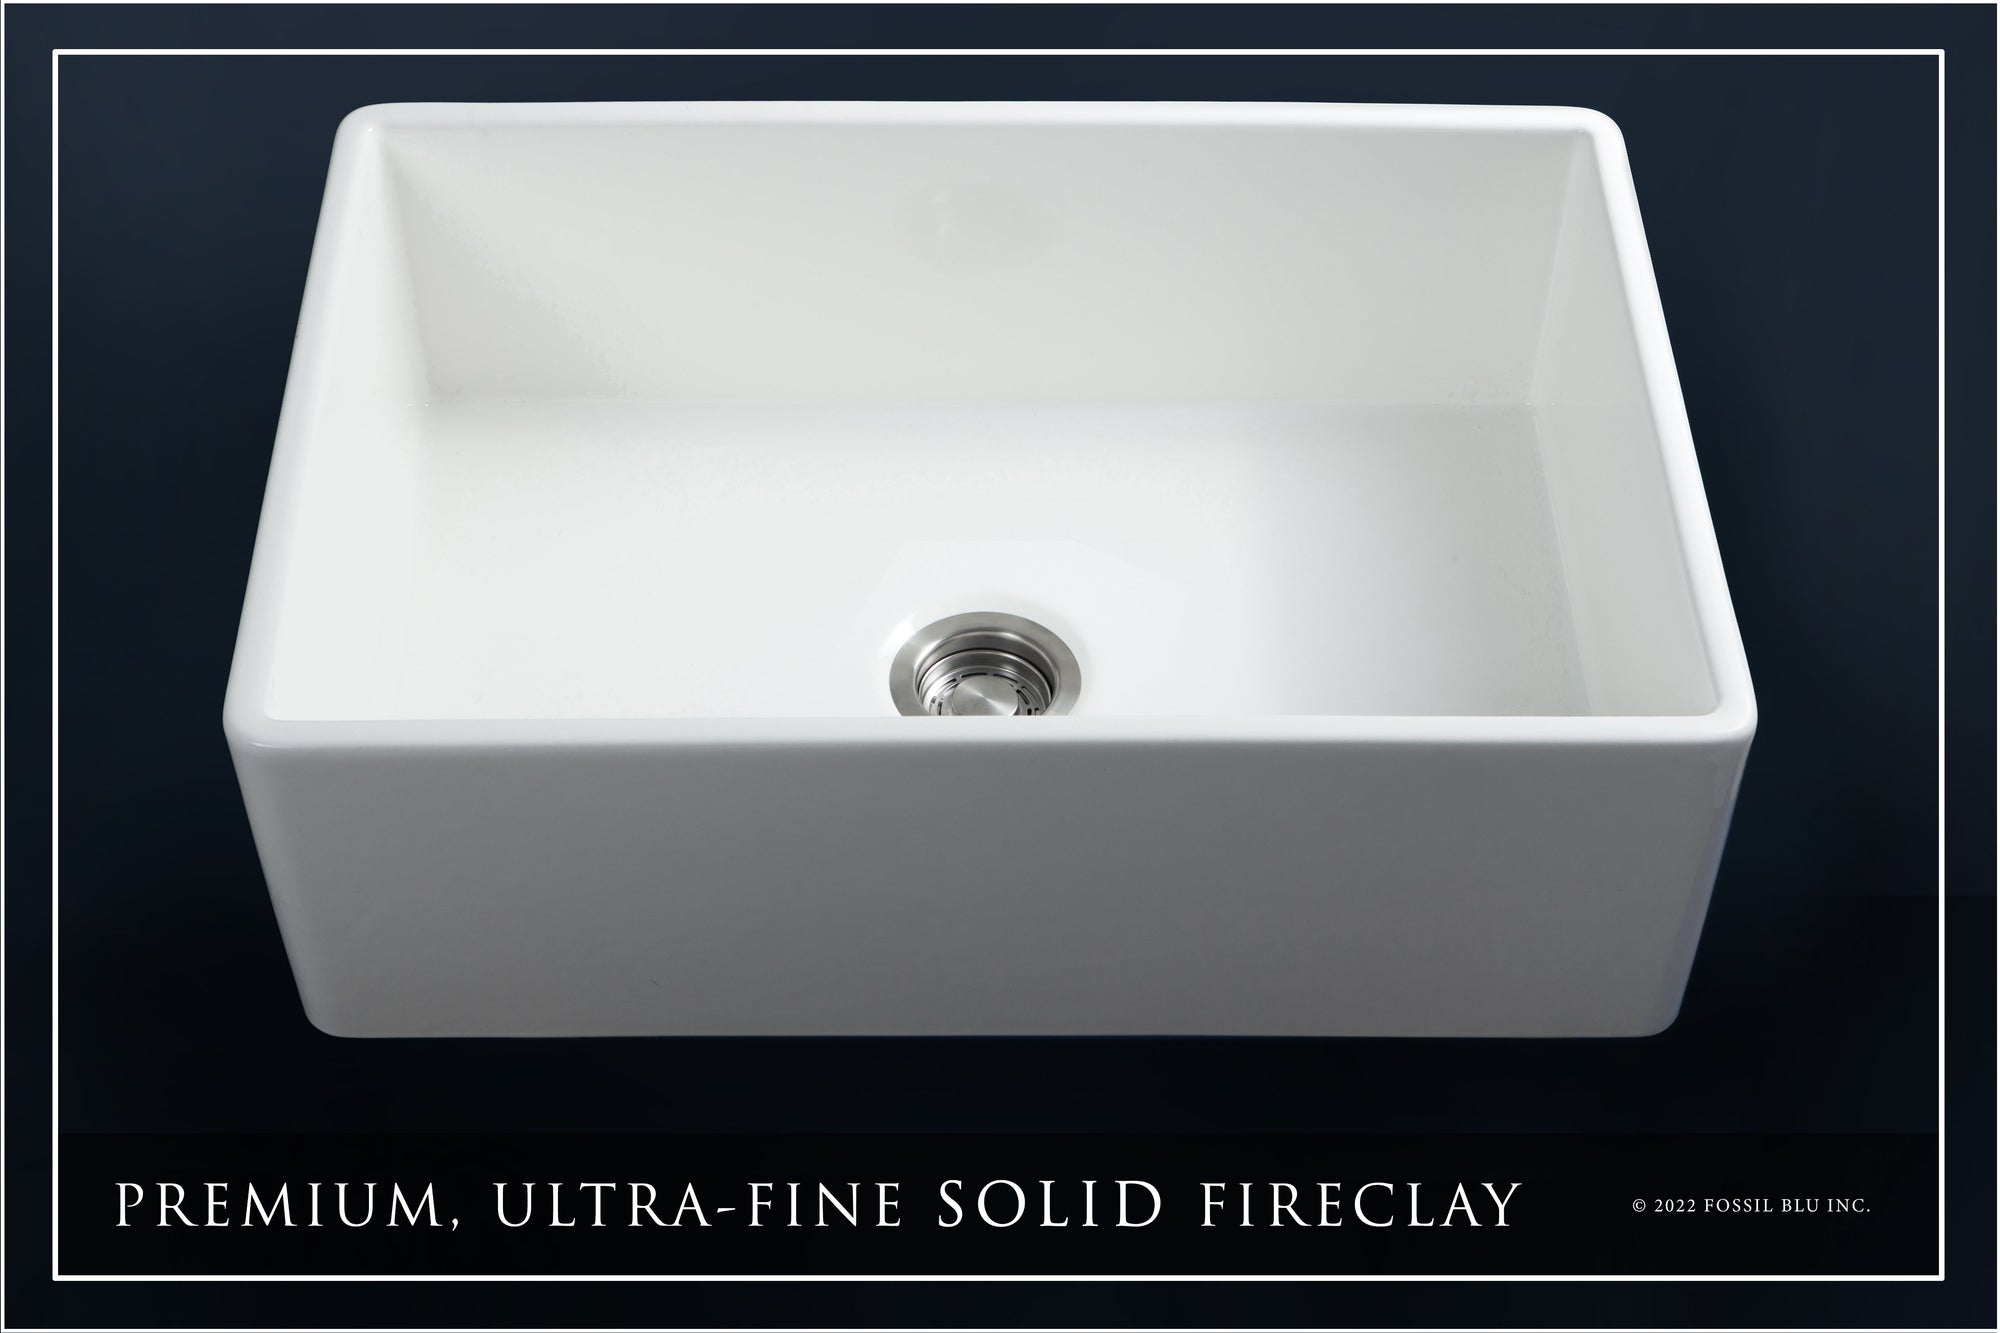 FSW1001 LUXURY 30-INCH SOLID FIRECLAY FARMHOUSE SINK IN WHITE, STAINLESS STEEL ACCS, FLAT FRONT